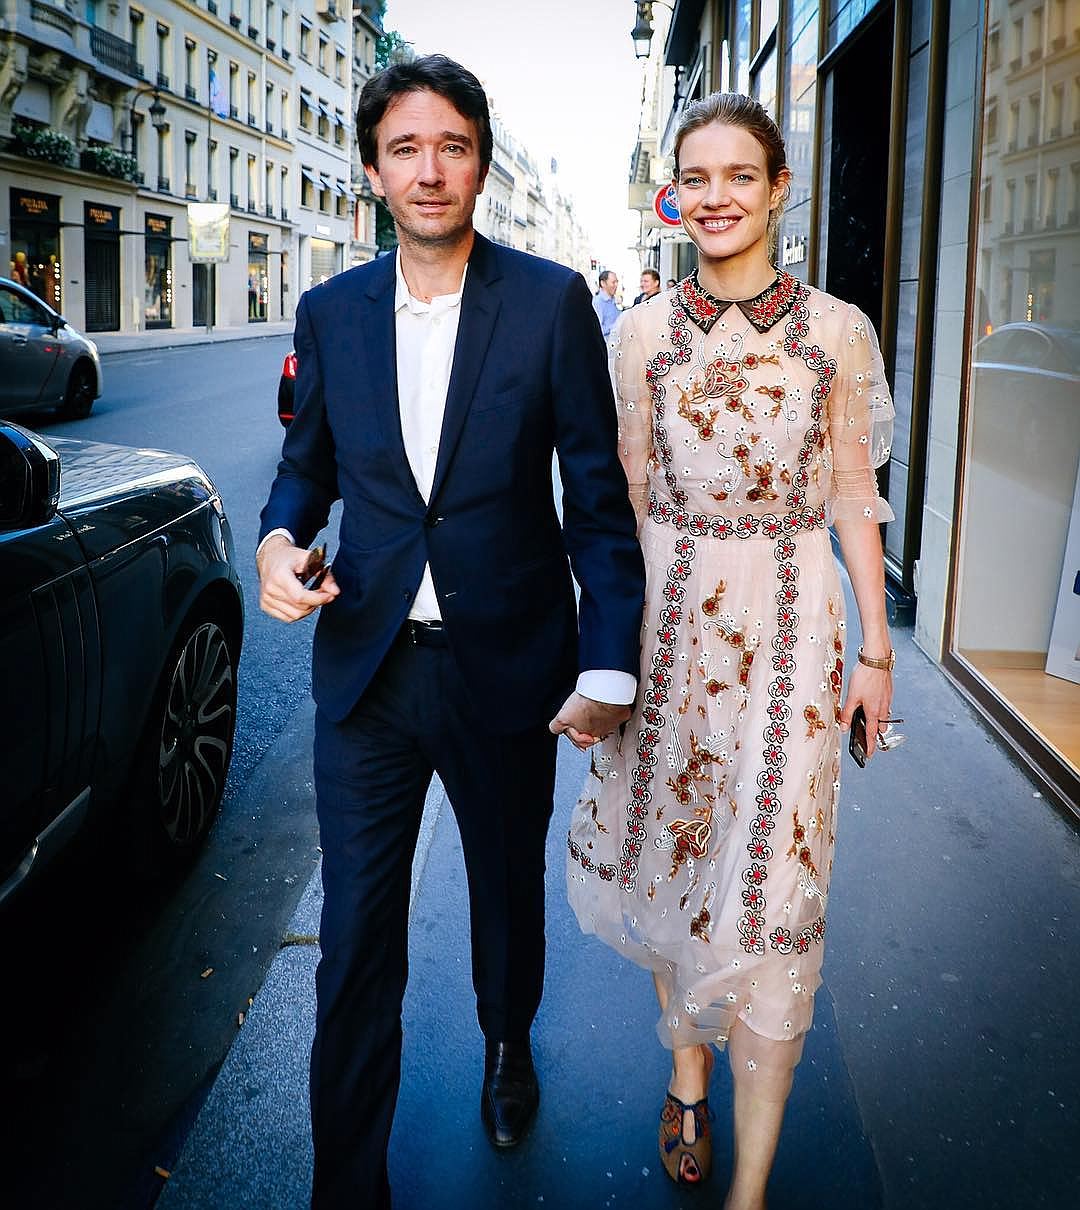 Natalia Vodianova looks like her 15-year-old son's age